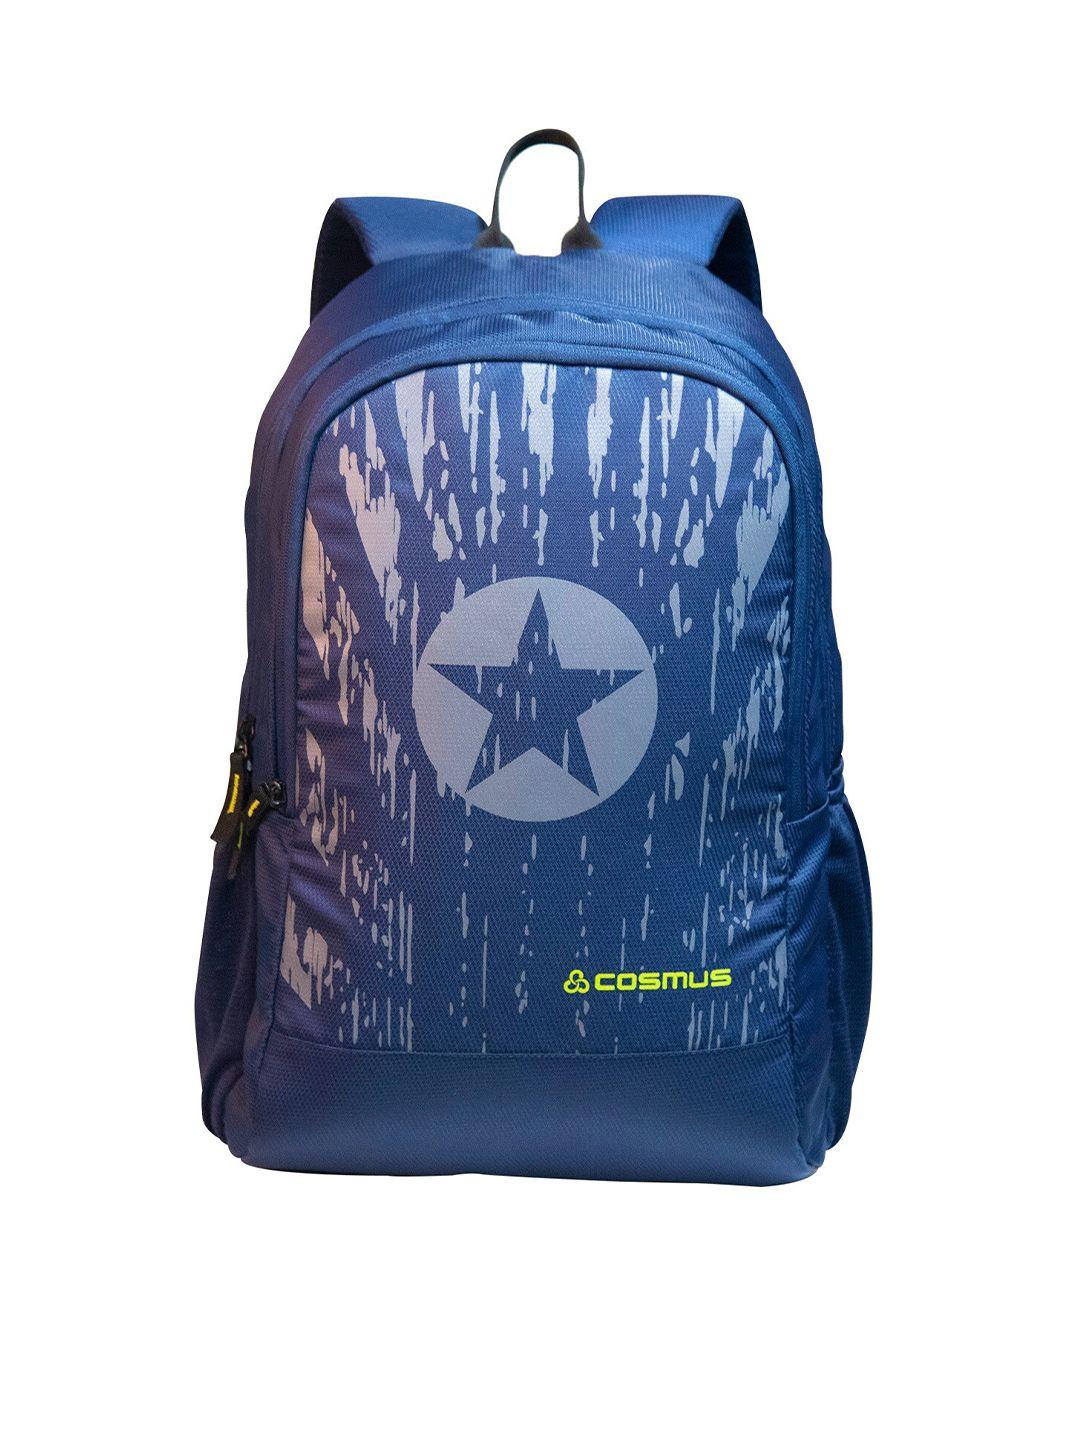 cosmus blue captain america backpack